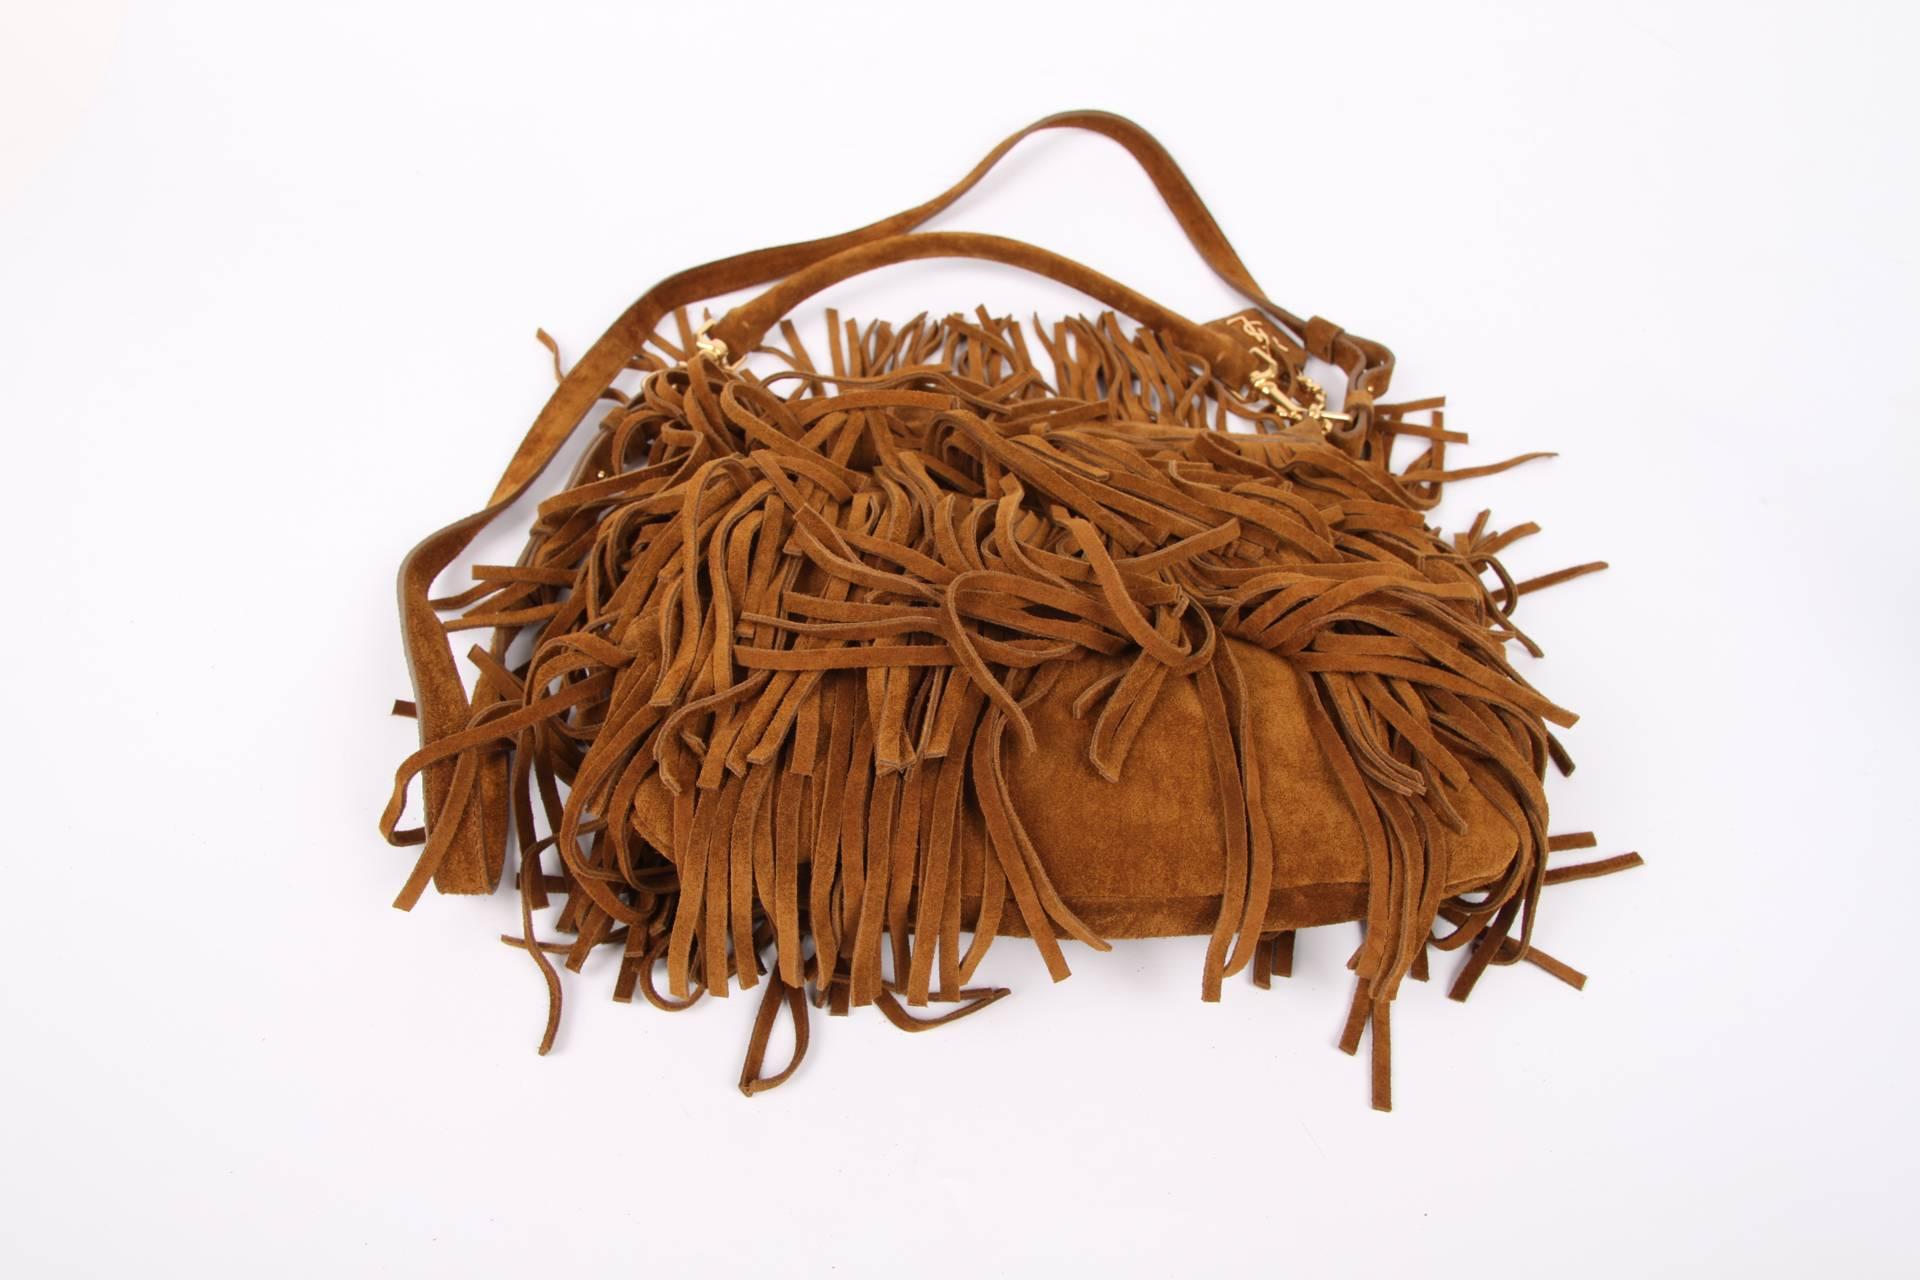 Such a cool bag! The Emmanuelle by Saint Laurent crafted in brown suede covered with fringes.

Top closure with a zipper. Two handles, the shorter on is detachable and the longer one is adjustable. So it can be worn on the arm or the shoulder, or